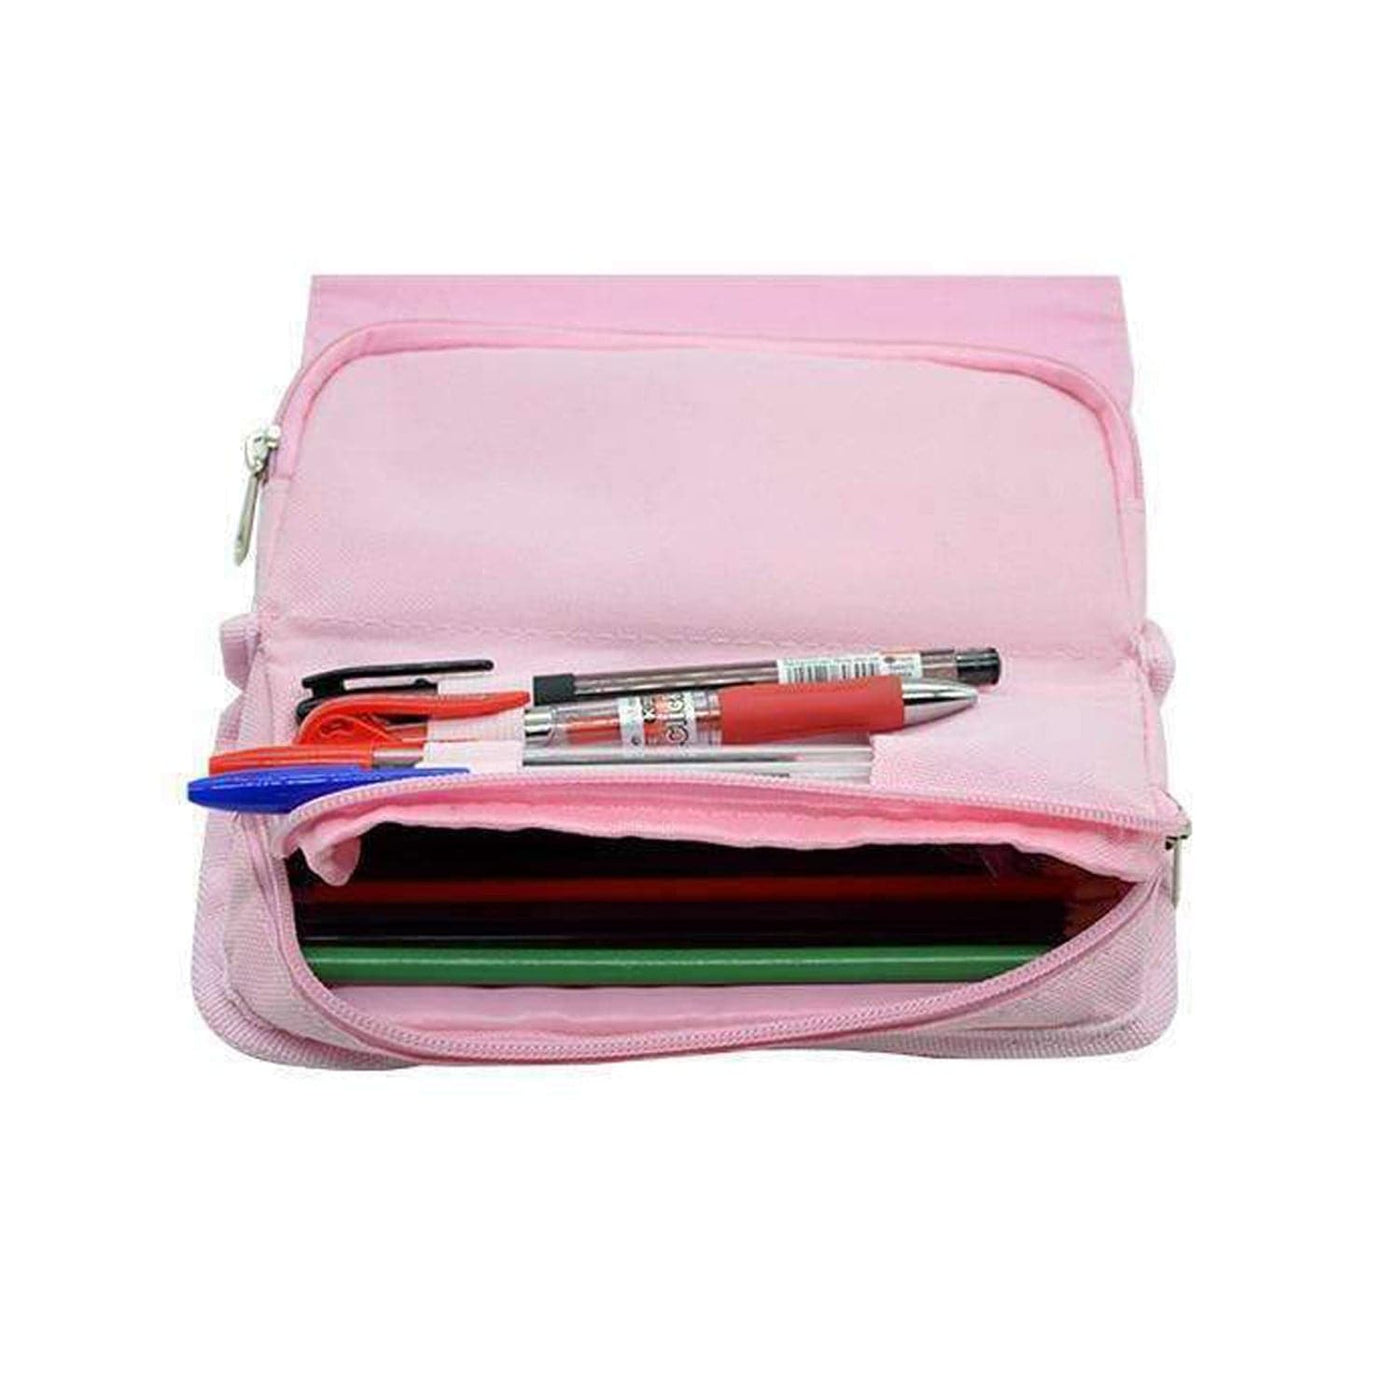 Red Butterfly - Butterfly Patterns Pencil Case